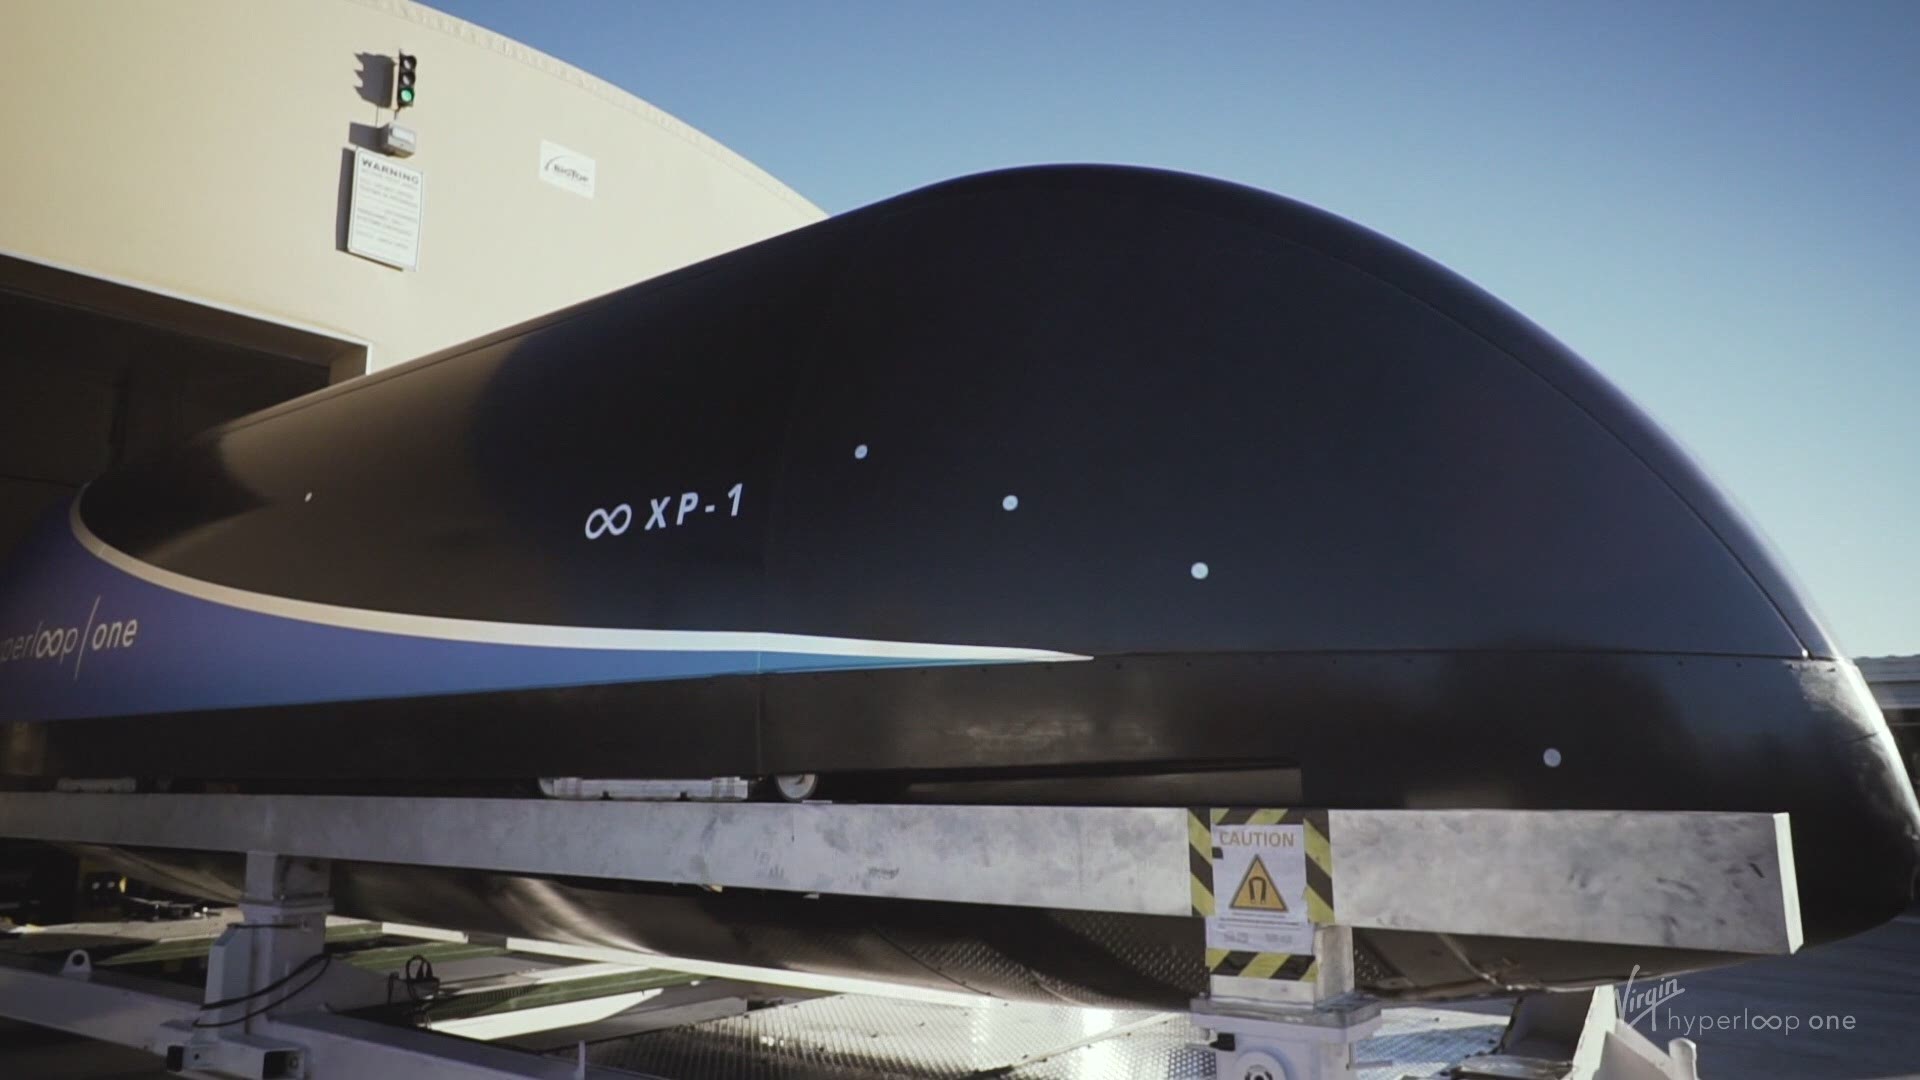 Hyperloop technology would allow people to travel from St. Louis to Kansas City in 30 minutes